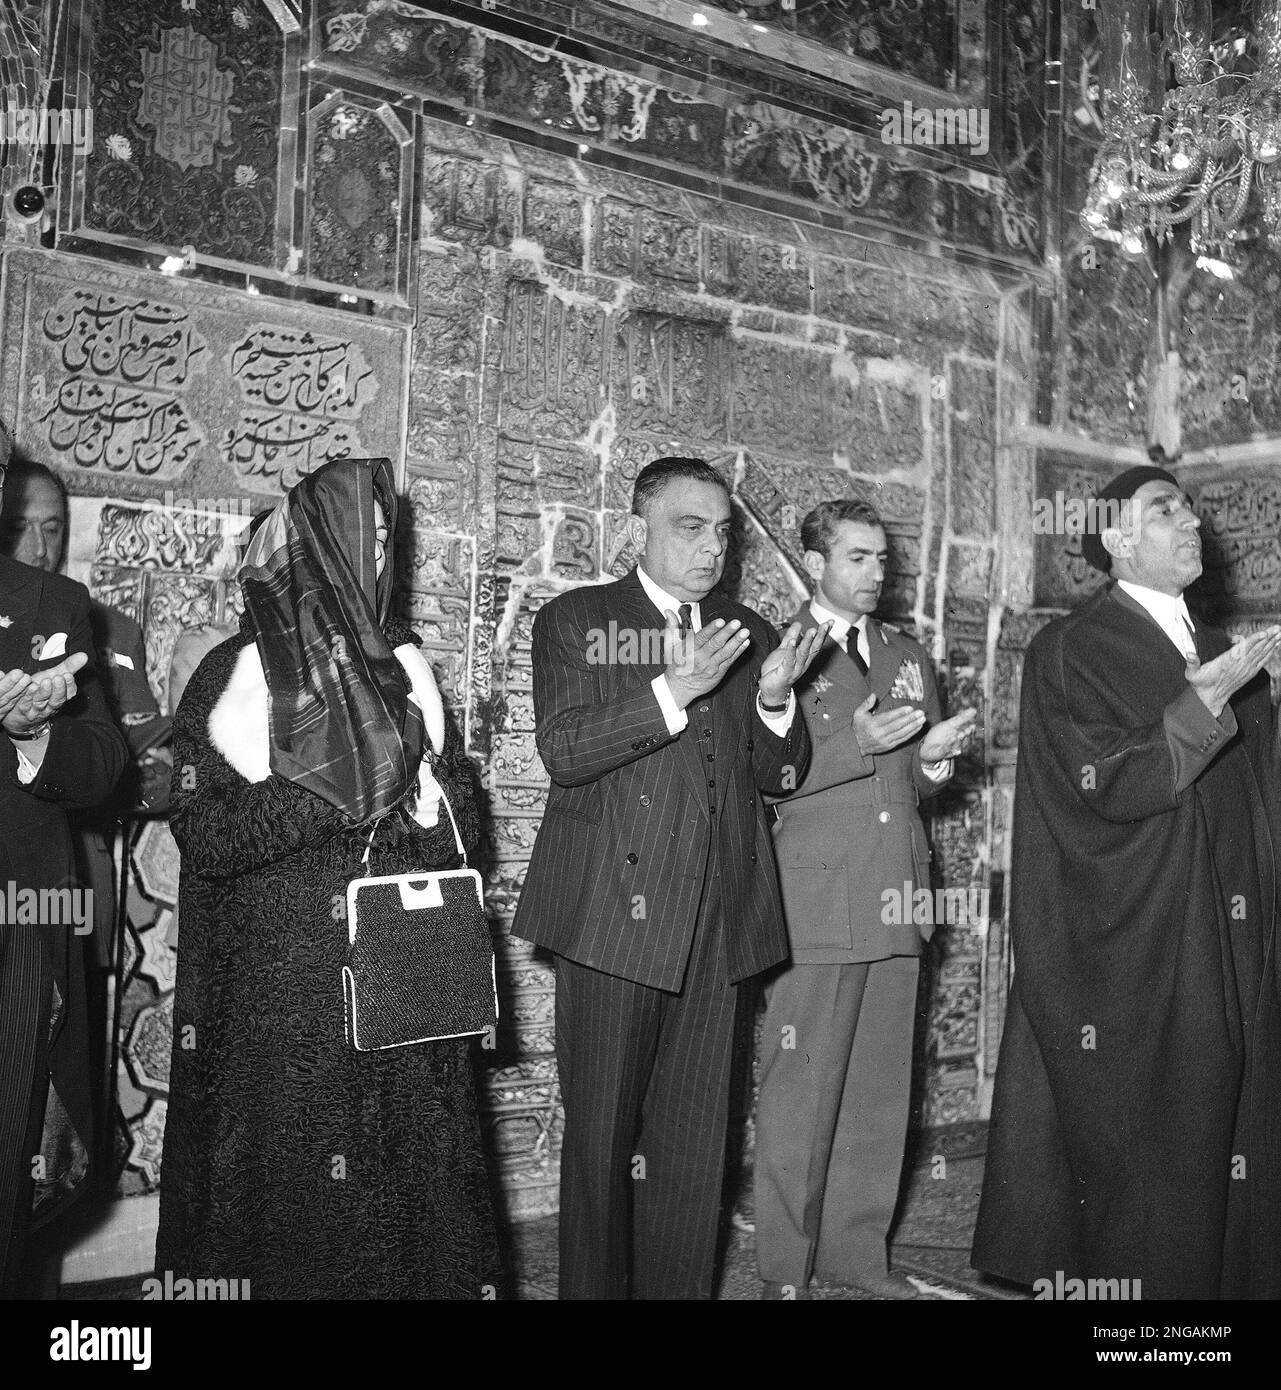 President Iskander Mirza of Pakistan, center, is seen at prayer during a state visit to Iran, at the Masshad holy shrine, at the tomb of the Imam Reza, Nov. 6, 1956. From left to right, Mirza's wife Begum Mirza; Mirza; and Shah of Iran, Reza Shah Pahlevi. Man at far right is unidentified. (AP Photo) Stock Photo